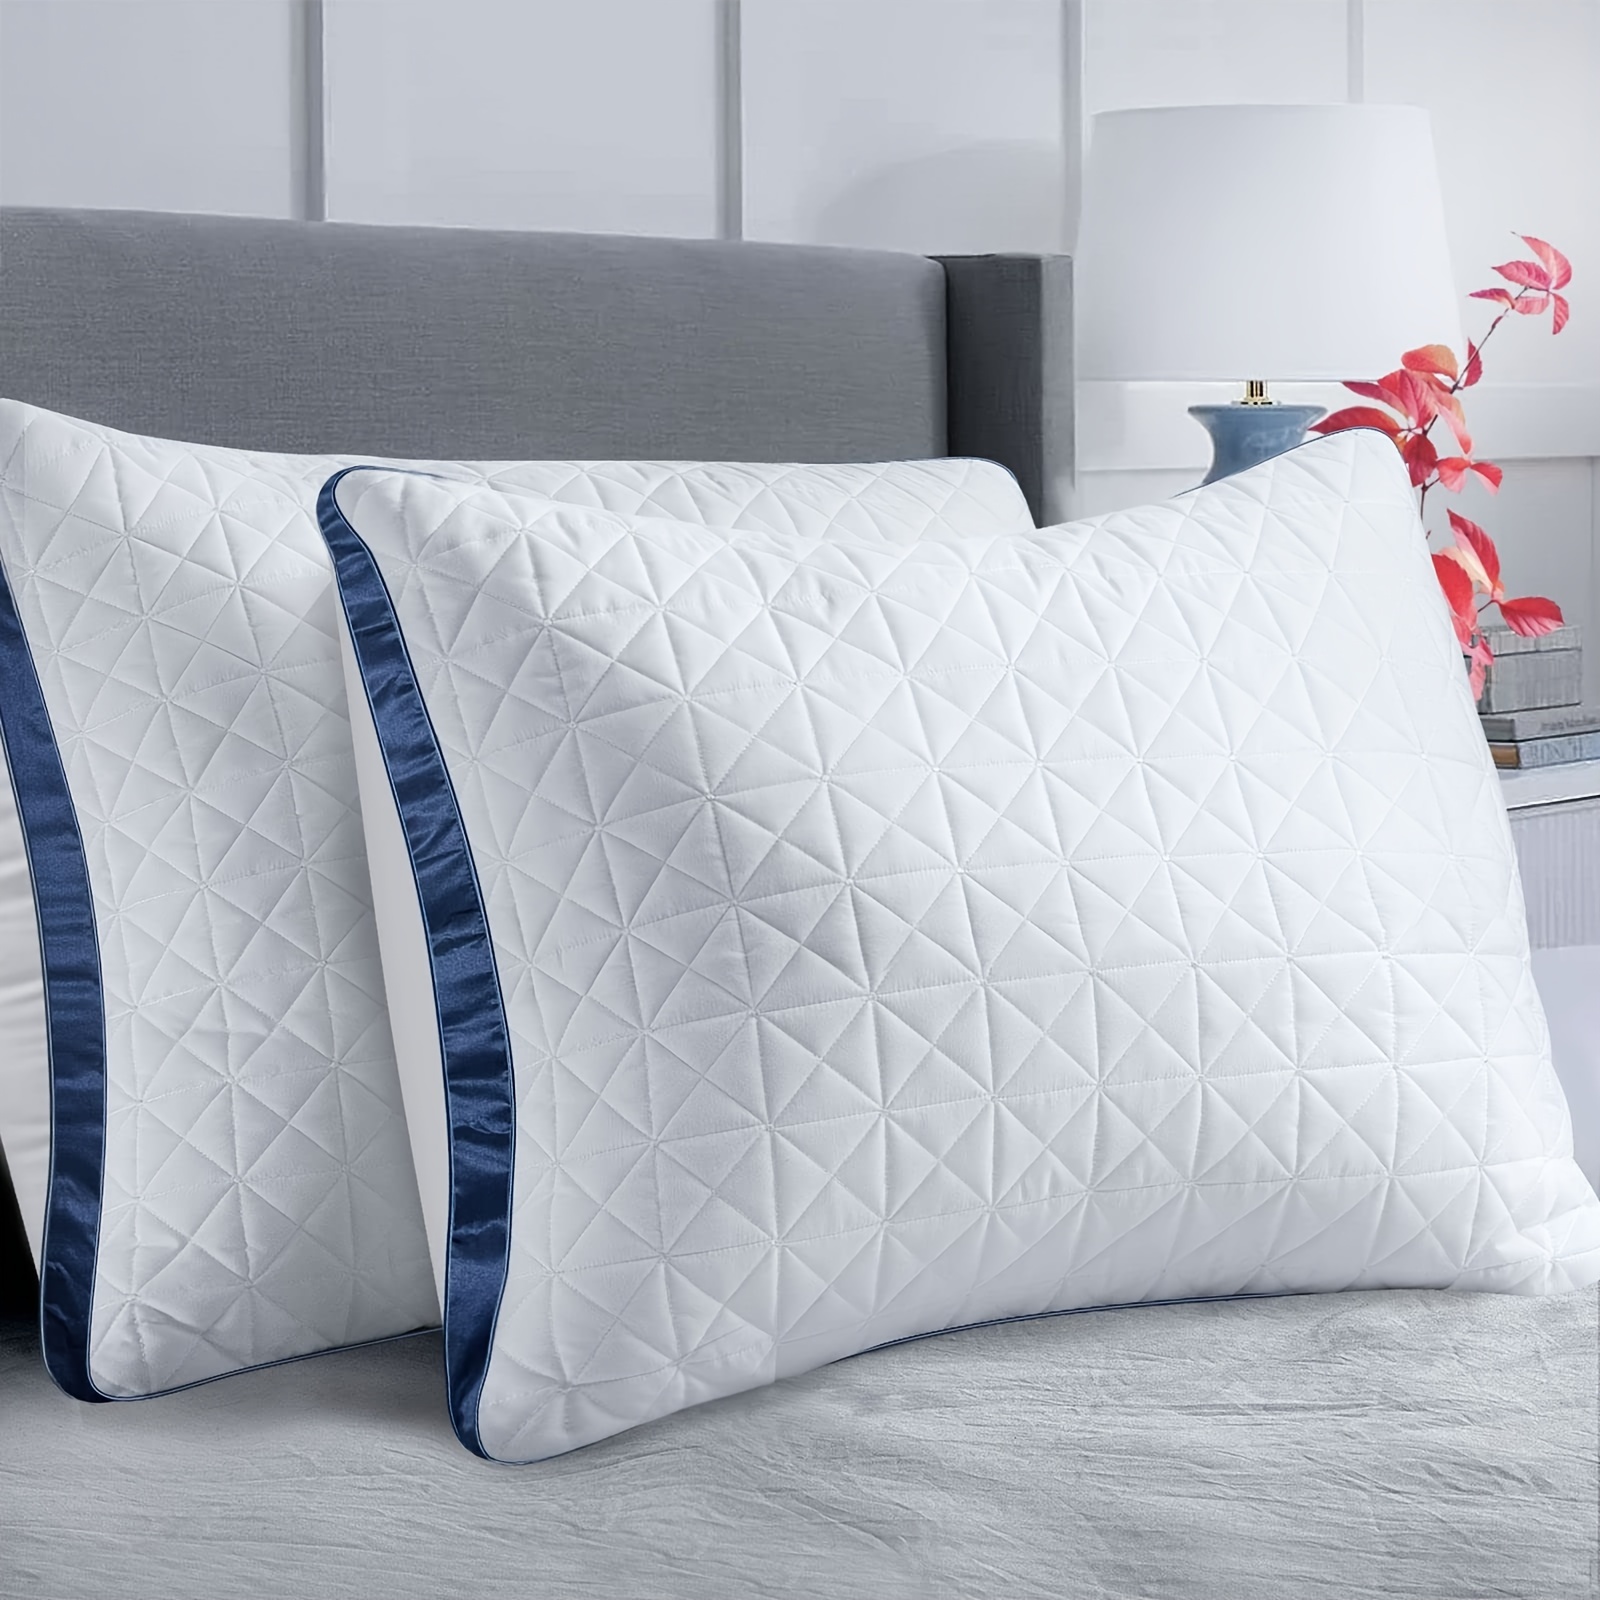 

2pcs Bed Pillows, Cooling Luxury Hotel Quality With Breathable Down Alternative Filling With Gusset, Supportive For Back, Stomach, Or Side Sleepers, -tex Certified For Bedroom Guest Room